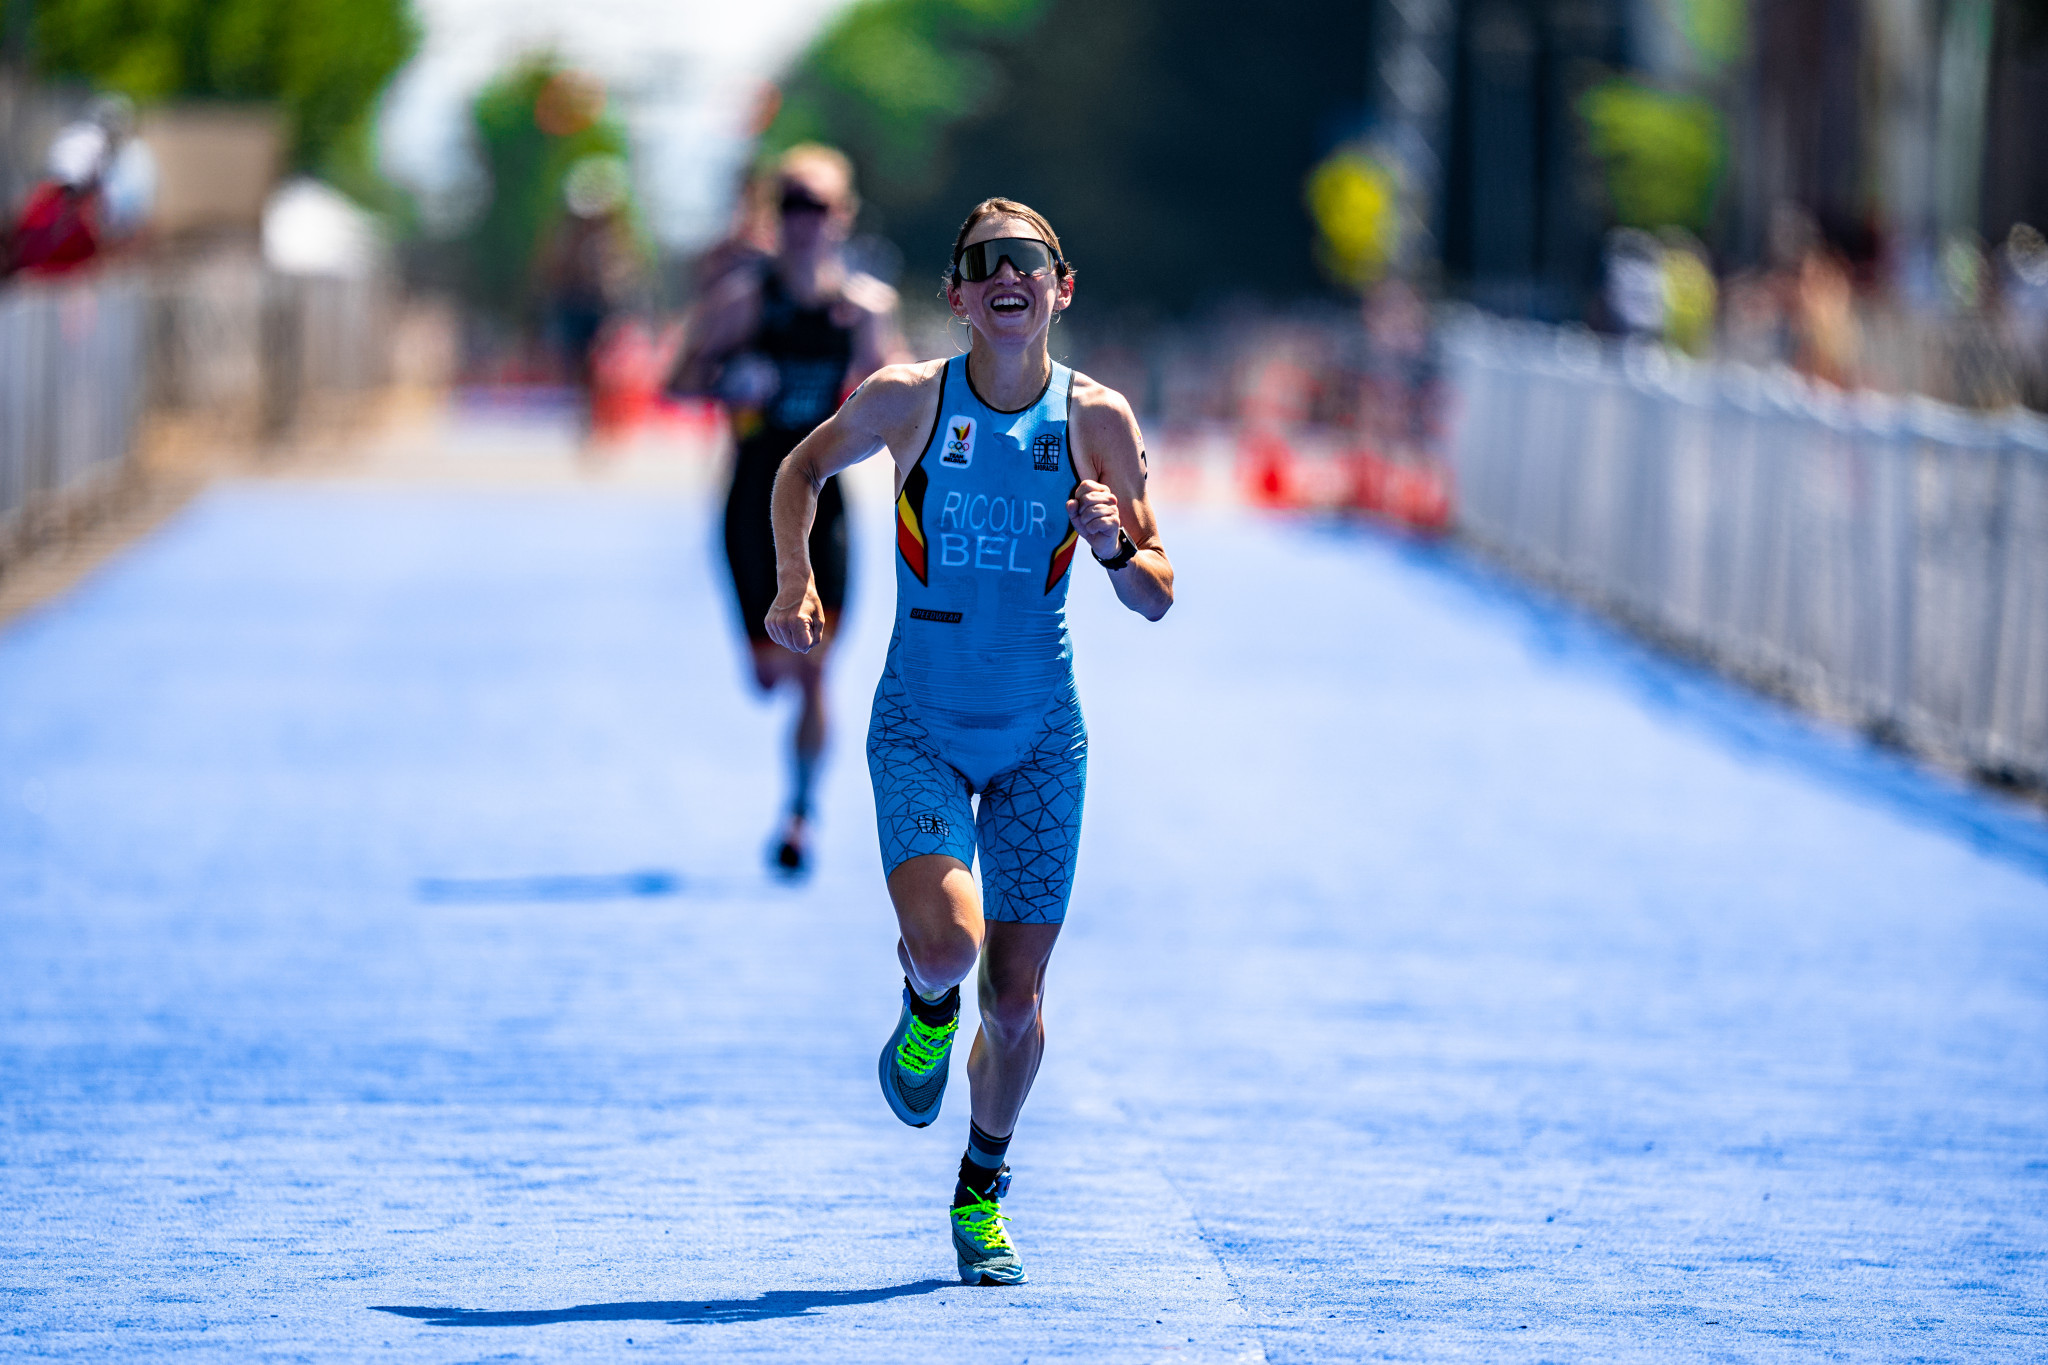 Maurine Ricour sprinted to victory in the duathlon women's individual final ©The World Games 2022/Parker S. Freedman/Dustin Massey Studios